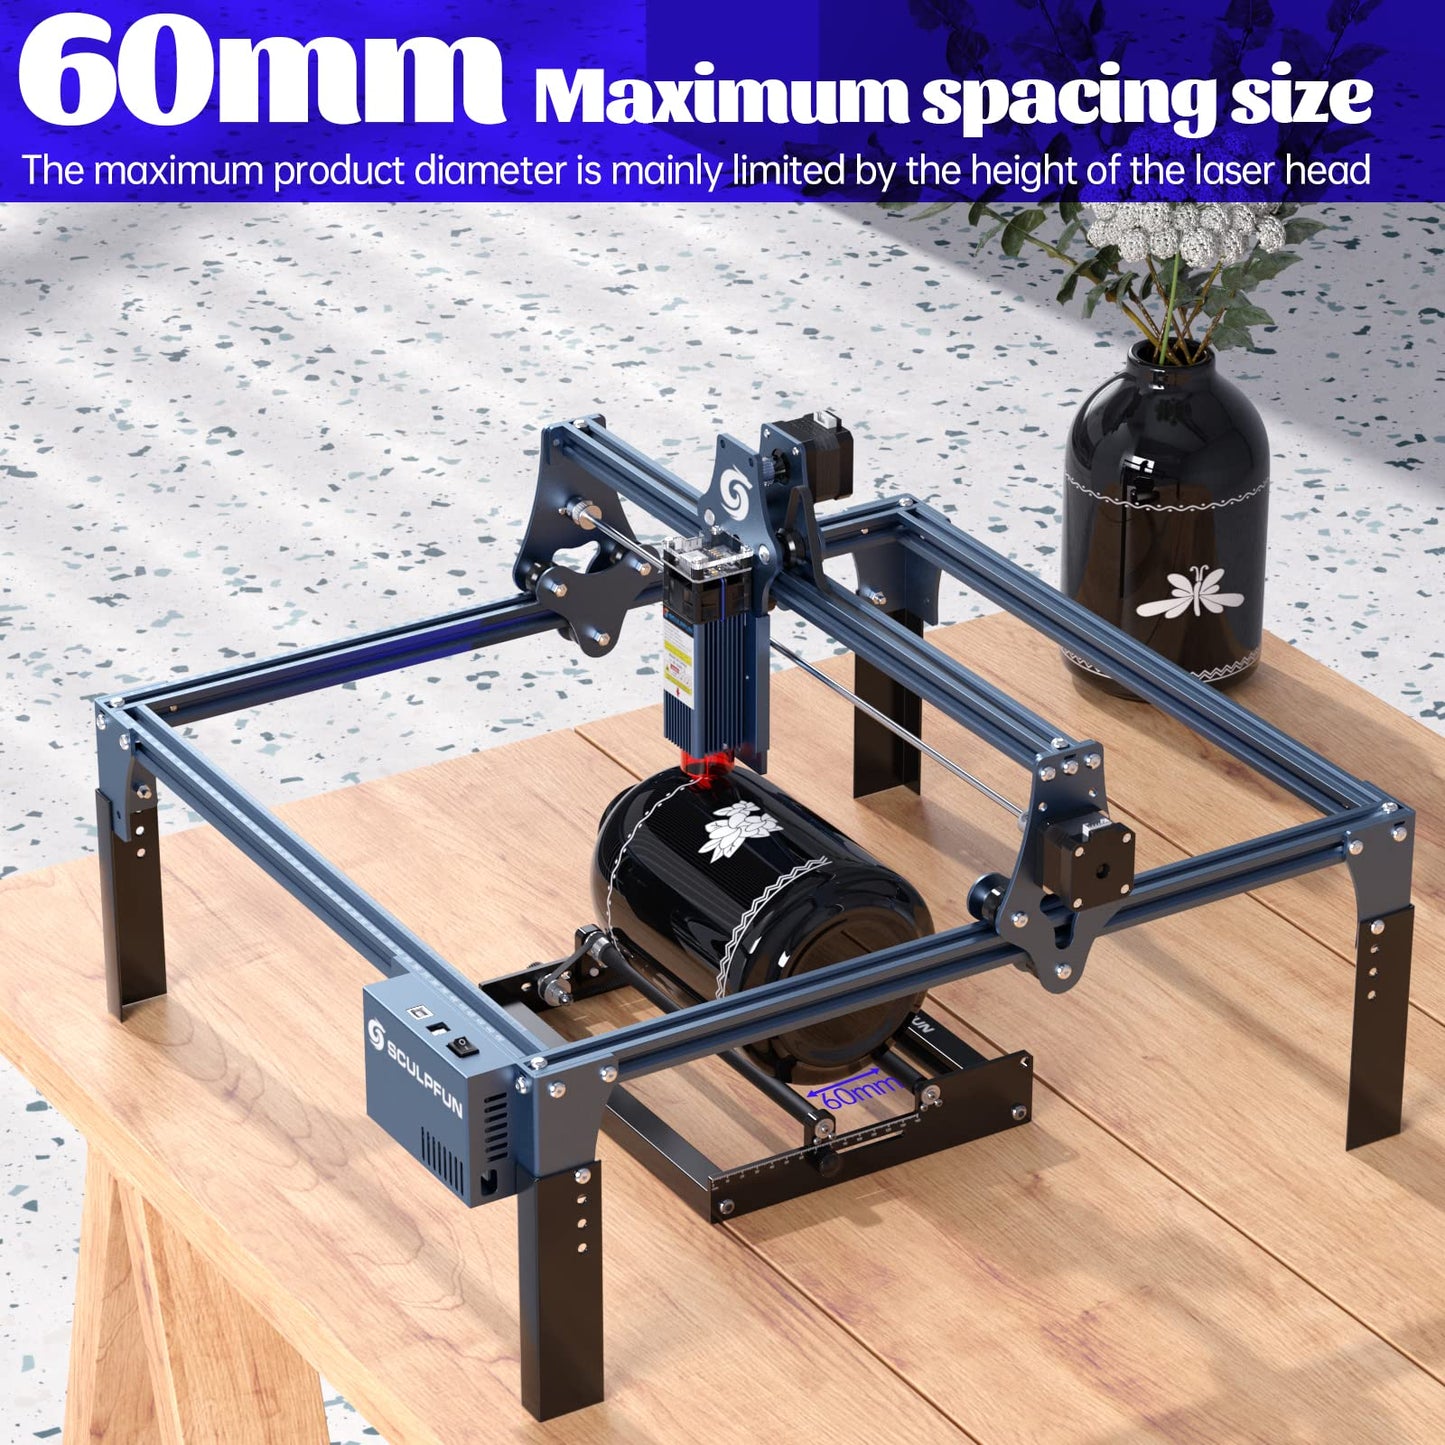 SCULPFUN Laser Rotary Roller, Y-axis Rotary Module, 360° Laser Engraver Laser Rotary Attachment for Engraving Cylindrical Objects Cans, Compatible